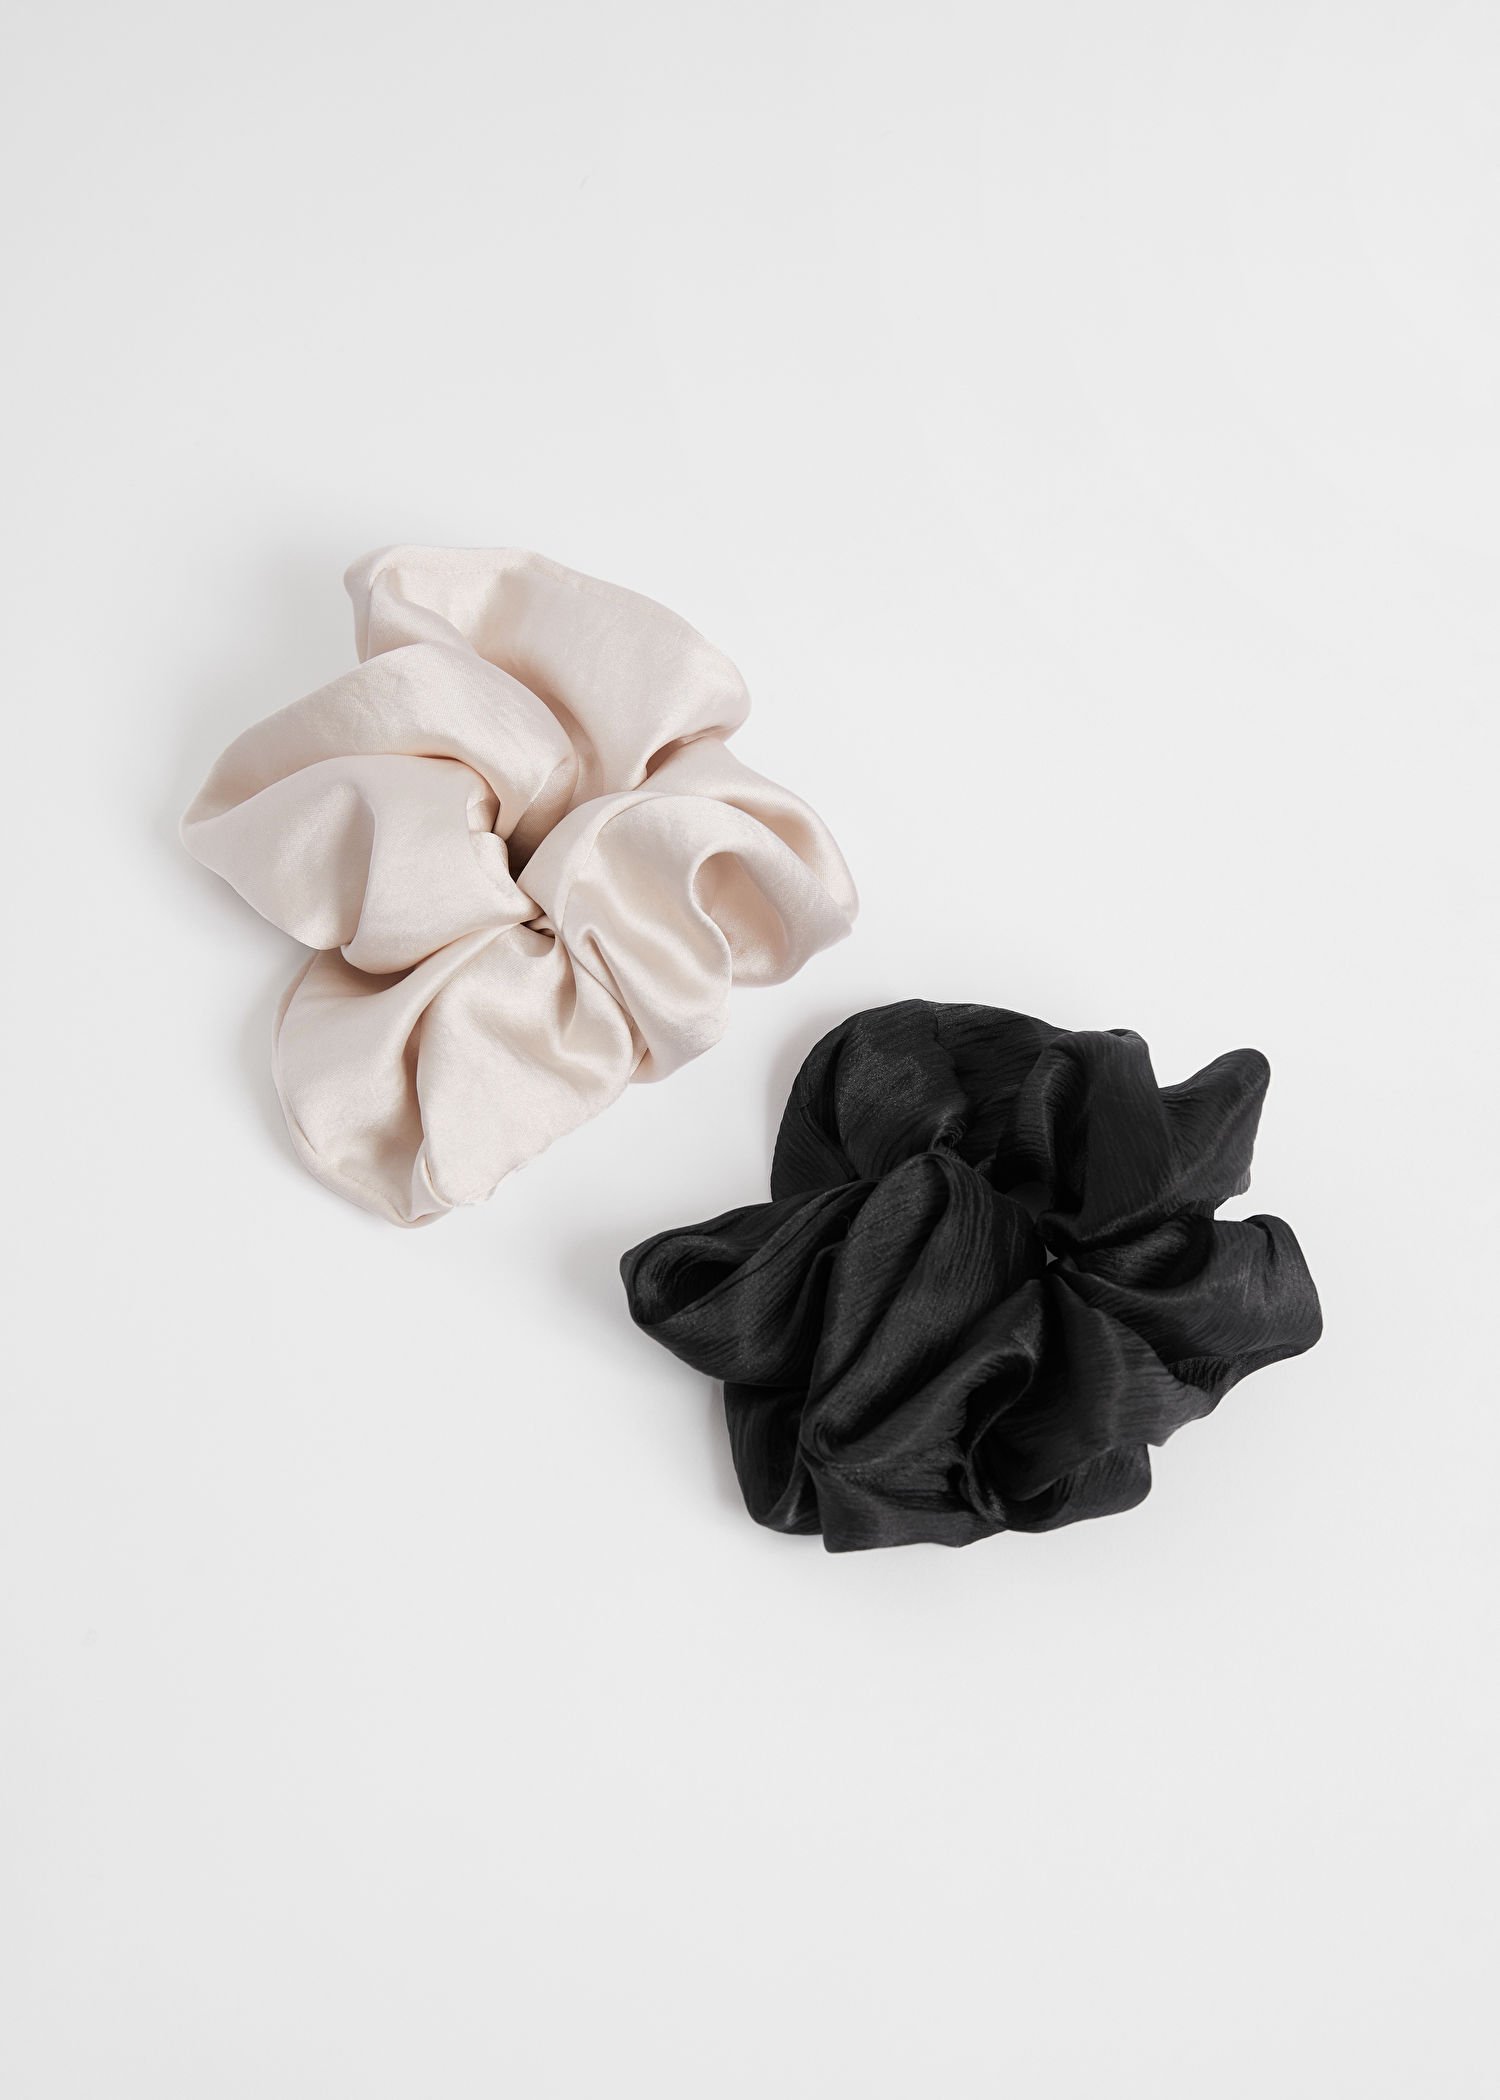 & OTHER STORIES Duo Extra-Large Satin Finish Scrunchie Set in Cream/Black |  Endource